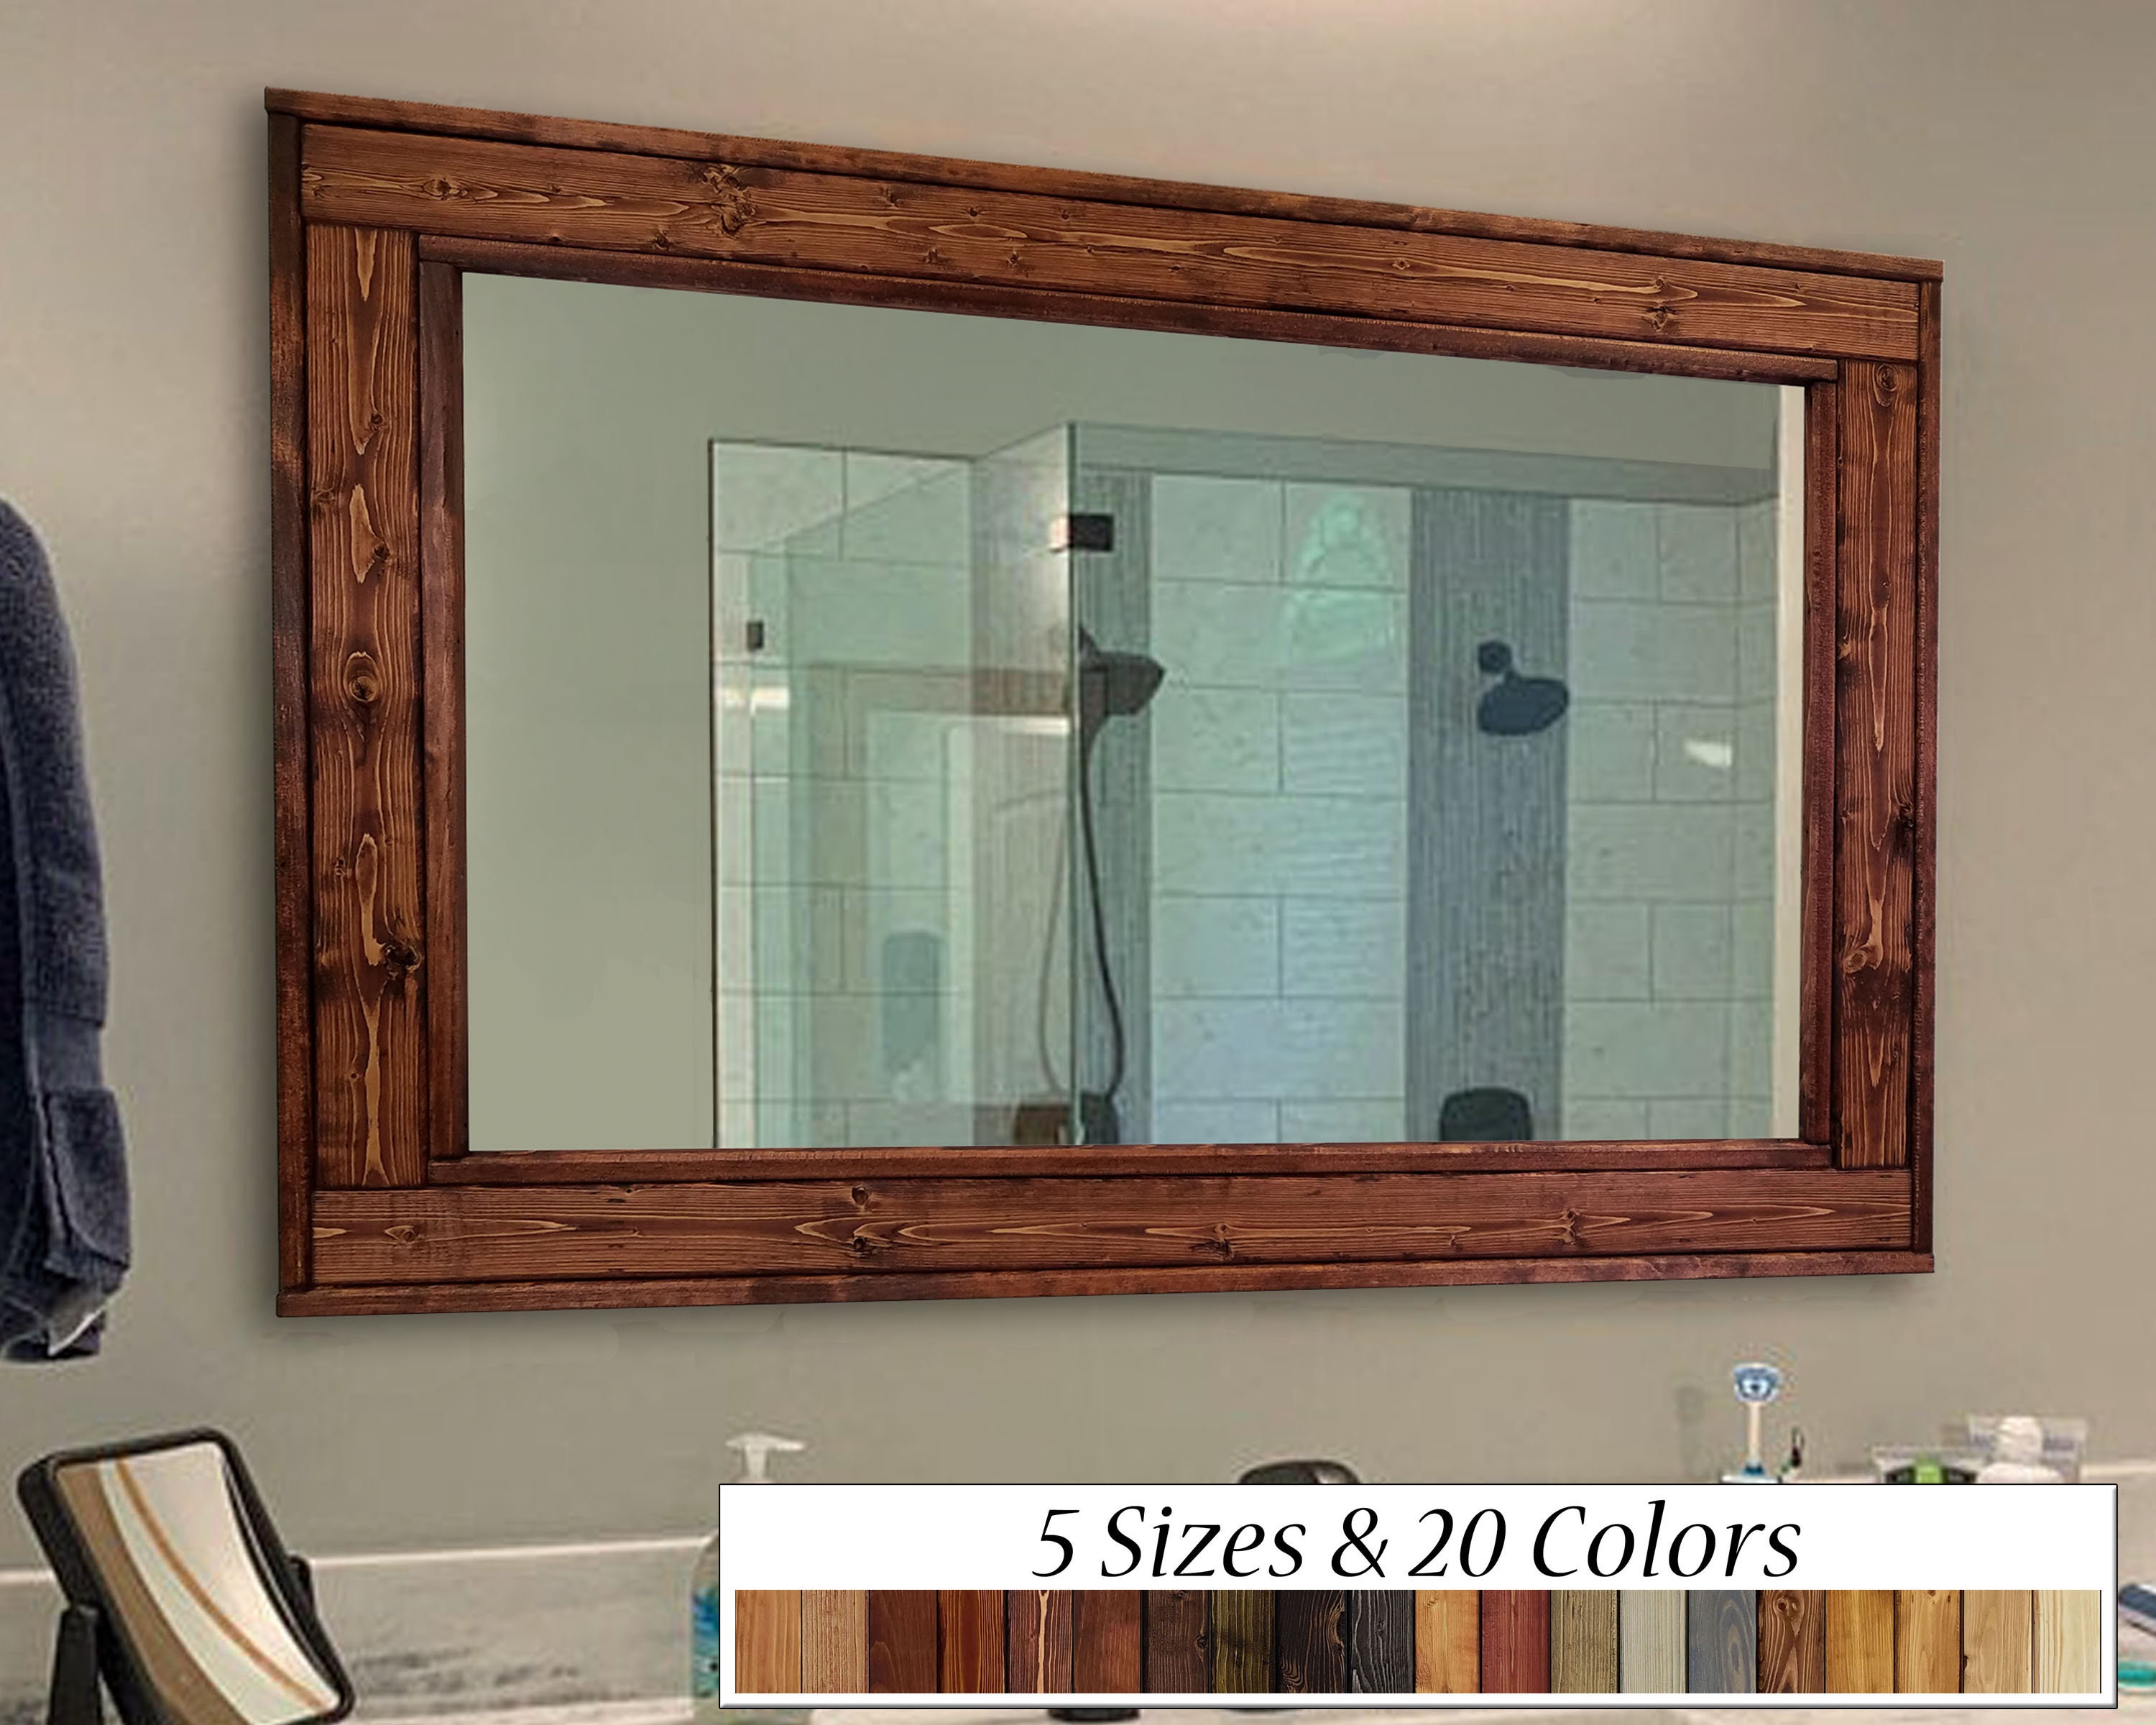  Frame My Mirror Add A Frame - Stainless Steel 22 x 30 Mirror  Frame Kit- Ideal for Bathroom, Wall Decor, Bedroom and Livingroom -  Moisture Resistant - Weston Design - Mirror